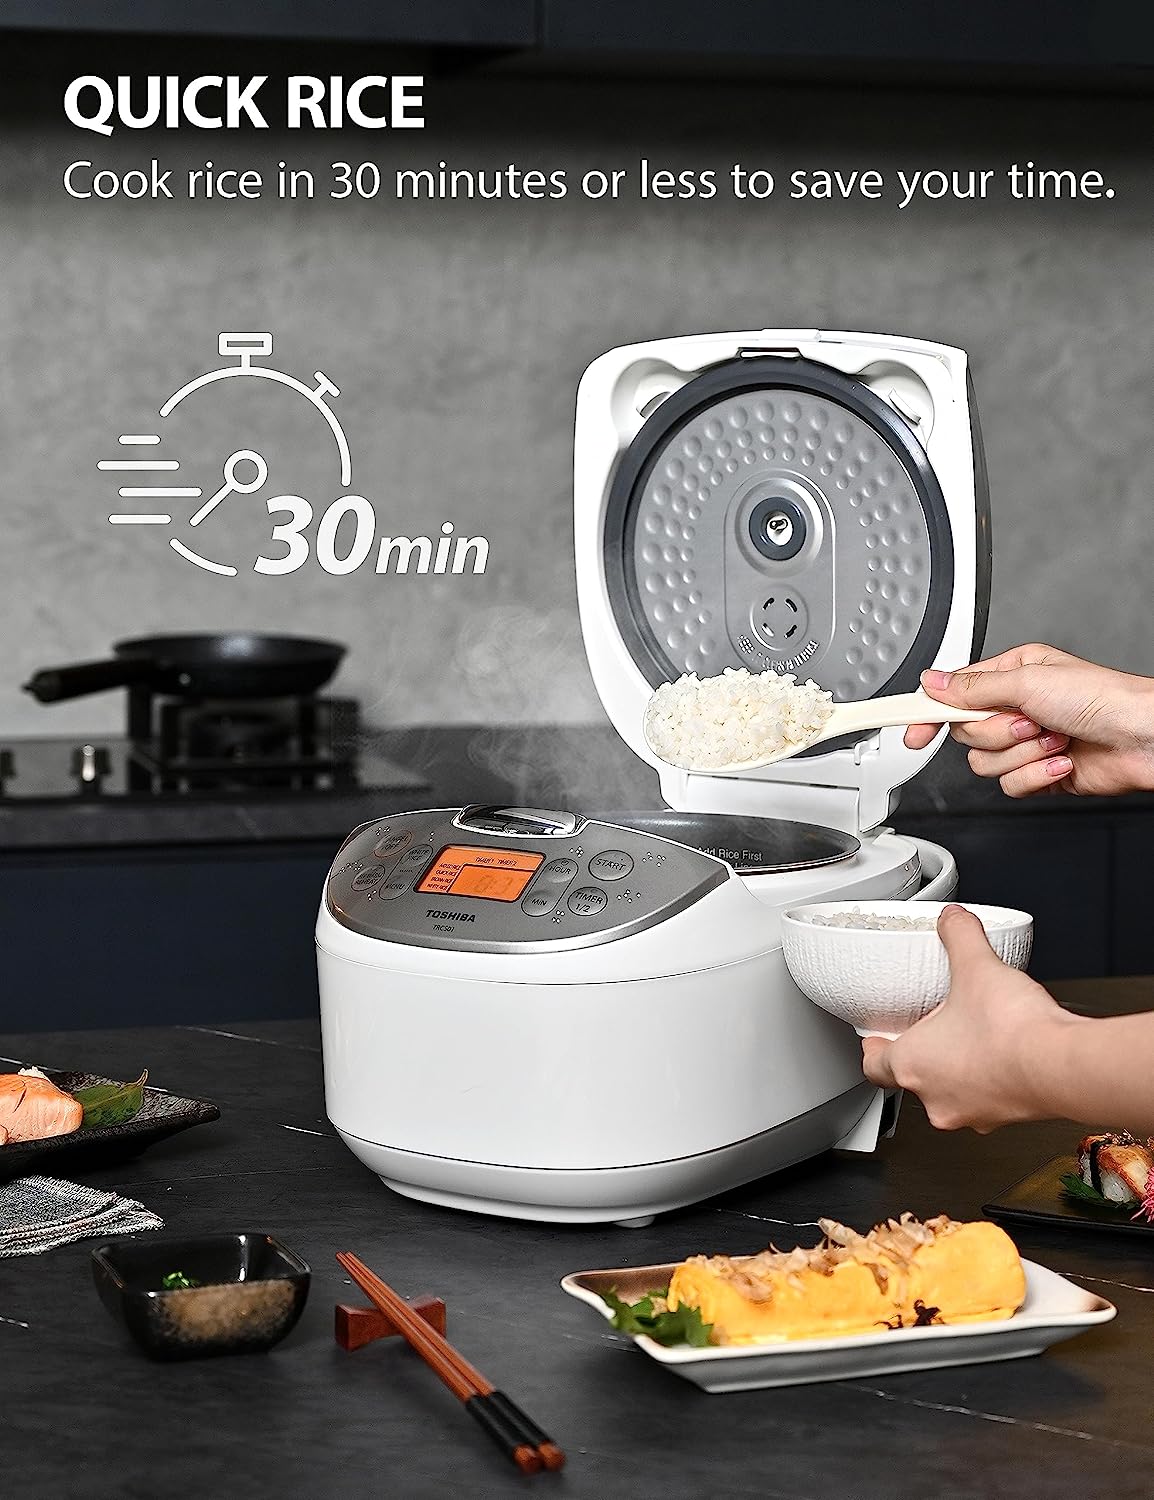 https://bigbigmart.com/wp-content/uploads/2023/08/Toshiba-Rice-Cooker-6-Cup-Uncooked-%E2%80%93-Japanese-Rice-Cooker-with-Fuzzy-Logic-Technology-7-Cooking-Functions-Digital-Display-2-Delay-Timers-and-Auto-Keep-Warm-Non-Stick-Inner-Pot-White5.jpg